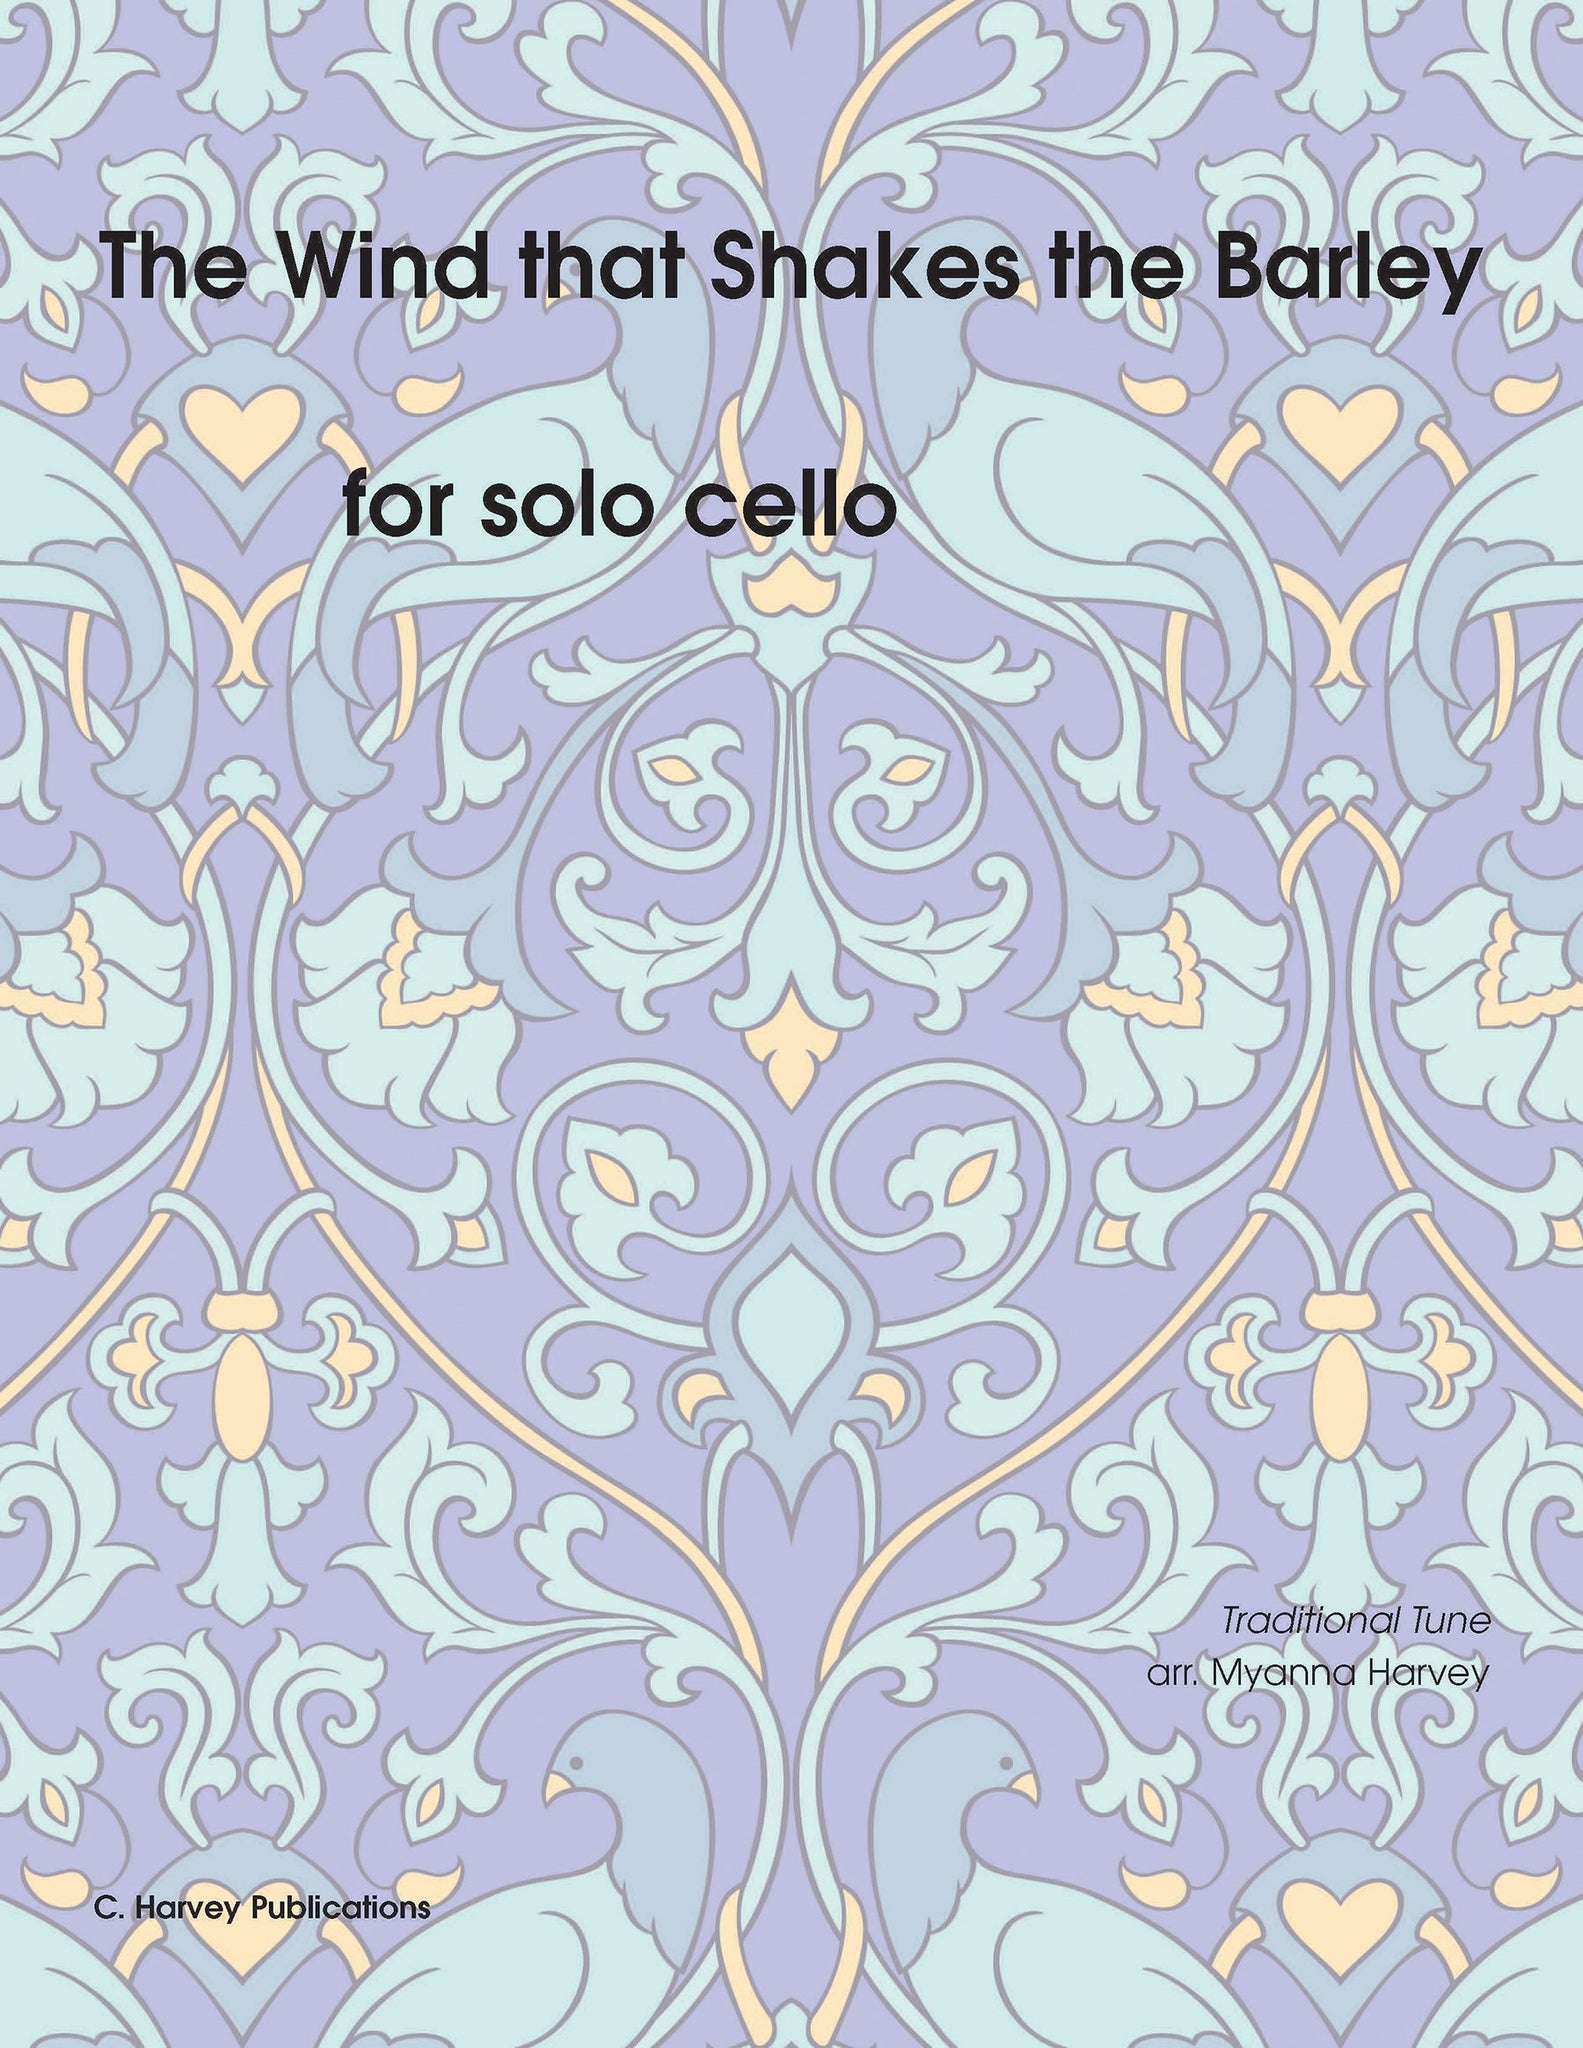 The Wind that Shakes the Barley for Solo Cello - Variations on an Unaccompanied Fiddle Tune - PDF download